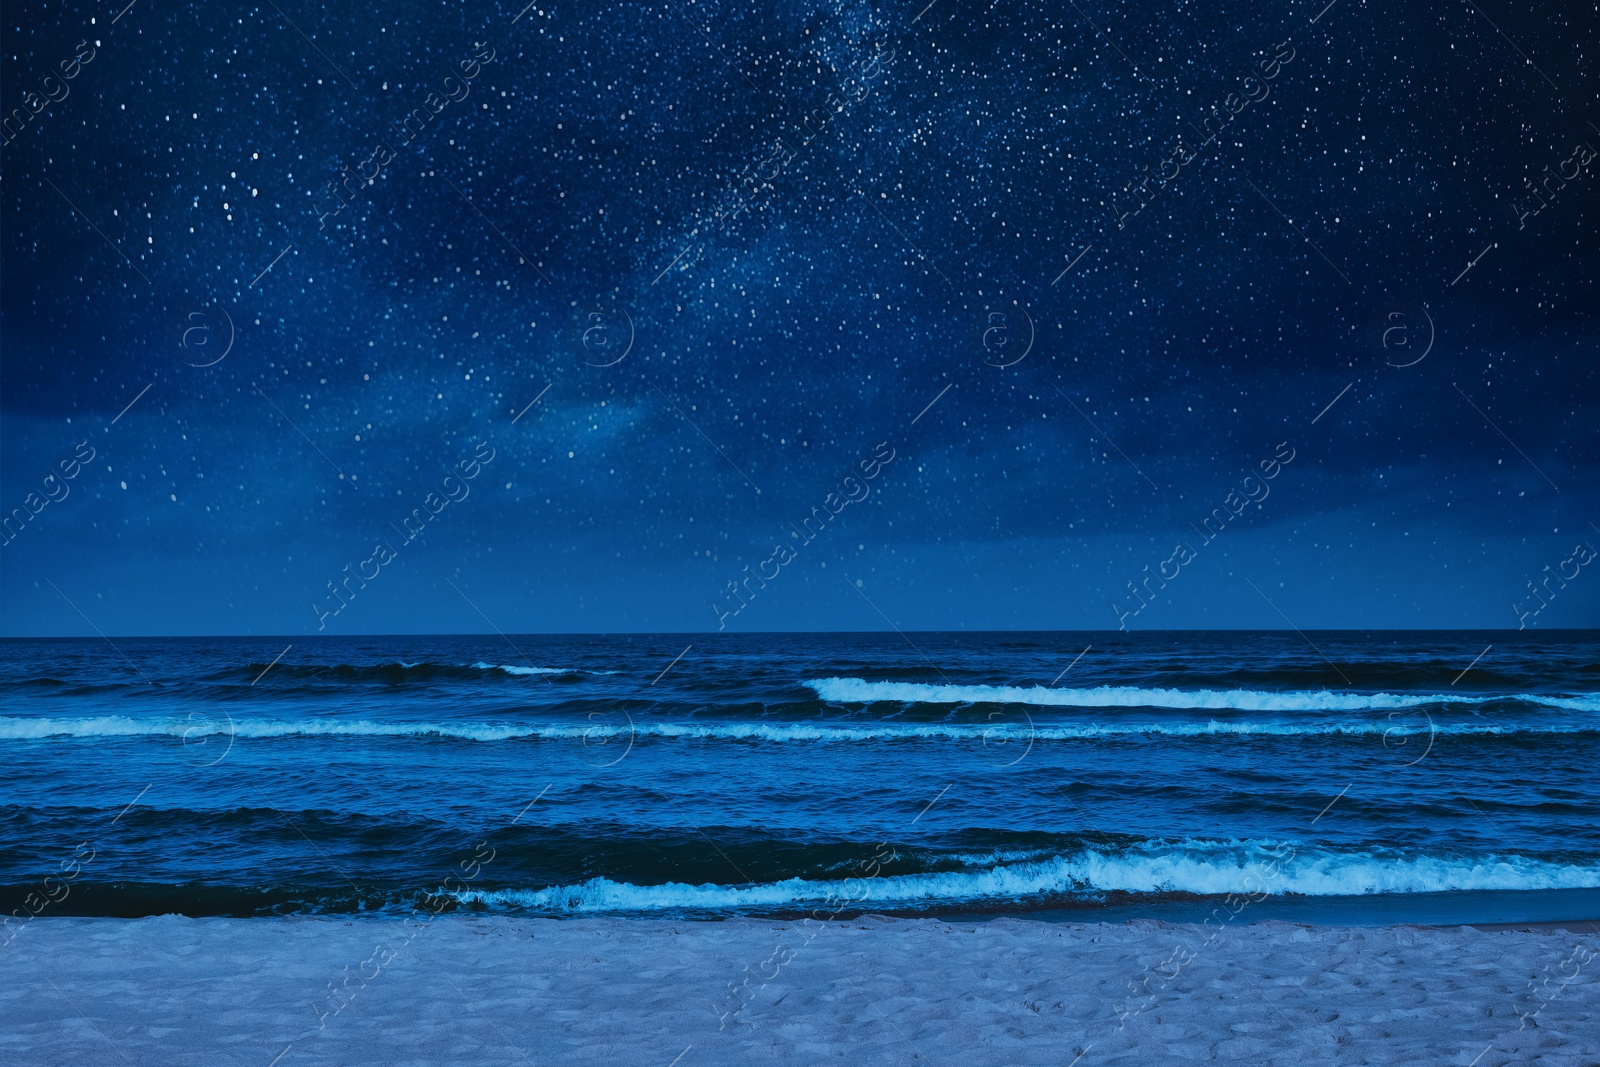 Image of Sea waves rolling onto sandy beach under starry sky at night